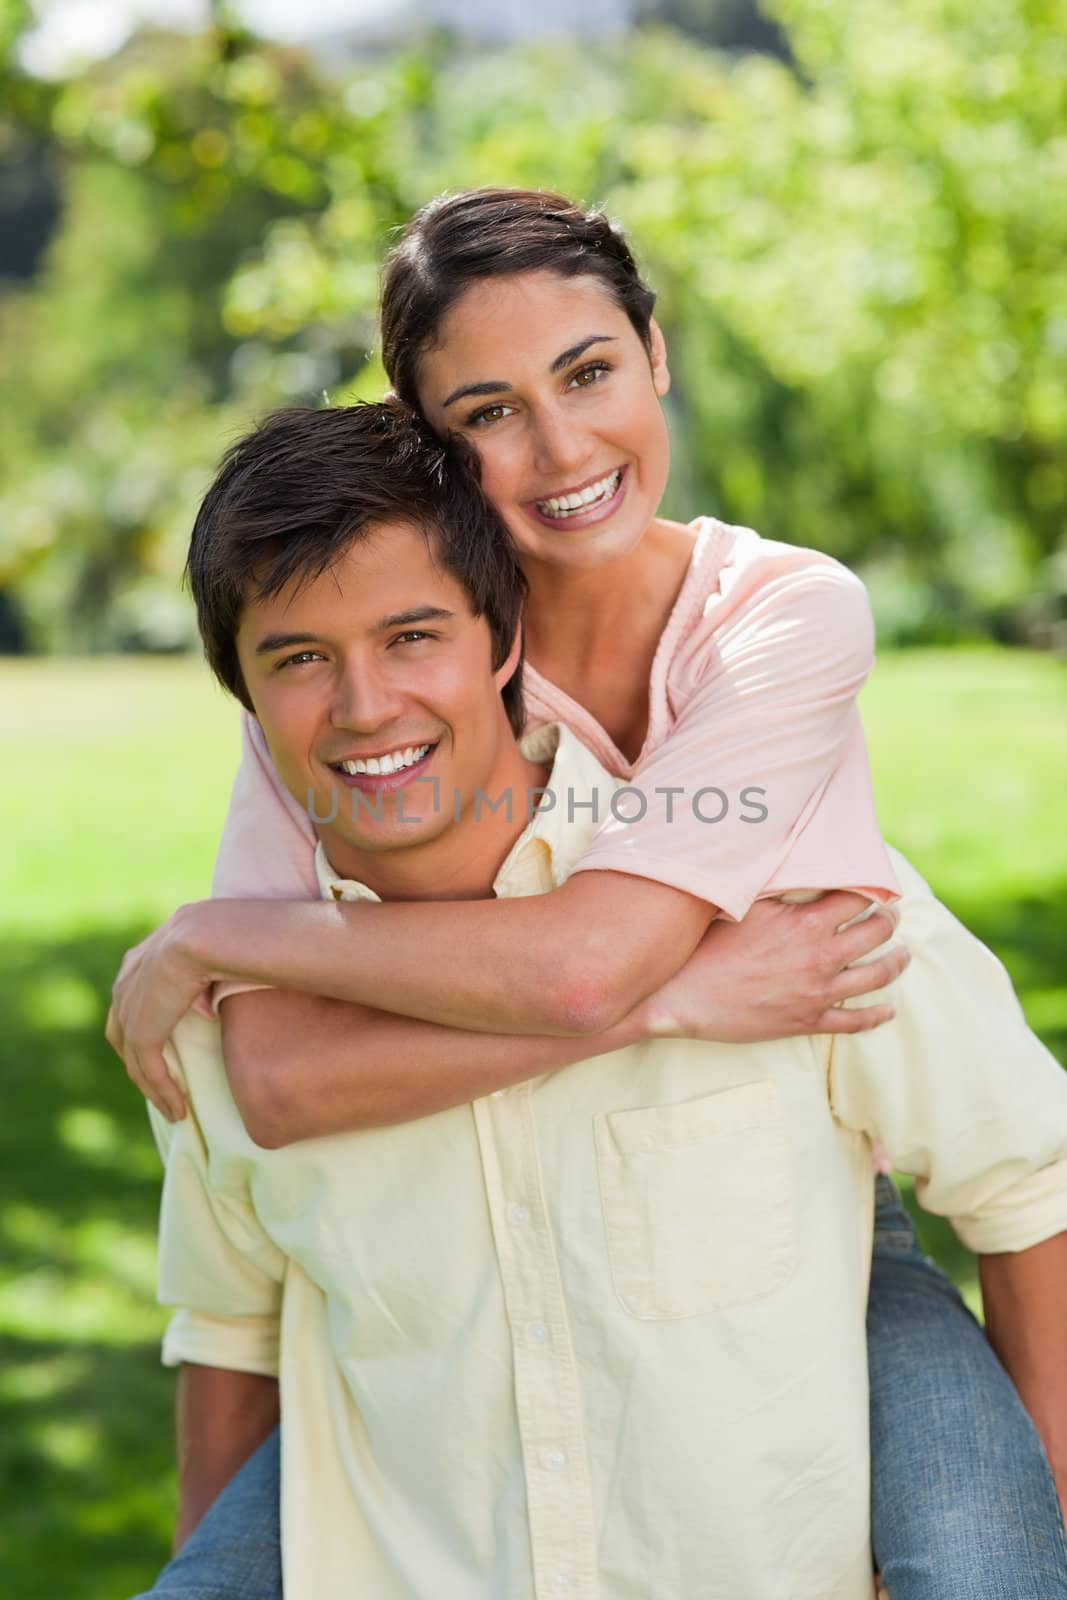 Woman looking ahead while her friend is carrying her on his back by Wavebreakmedia